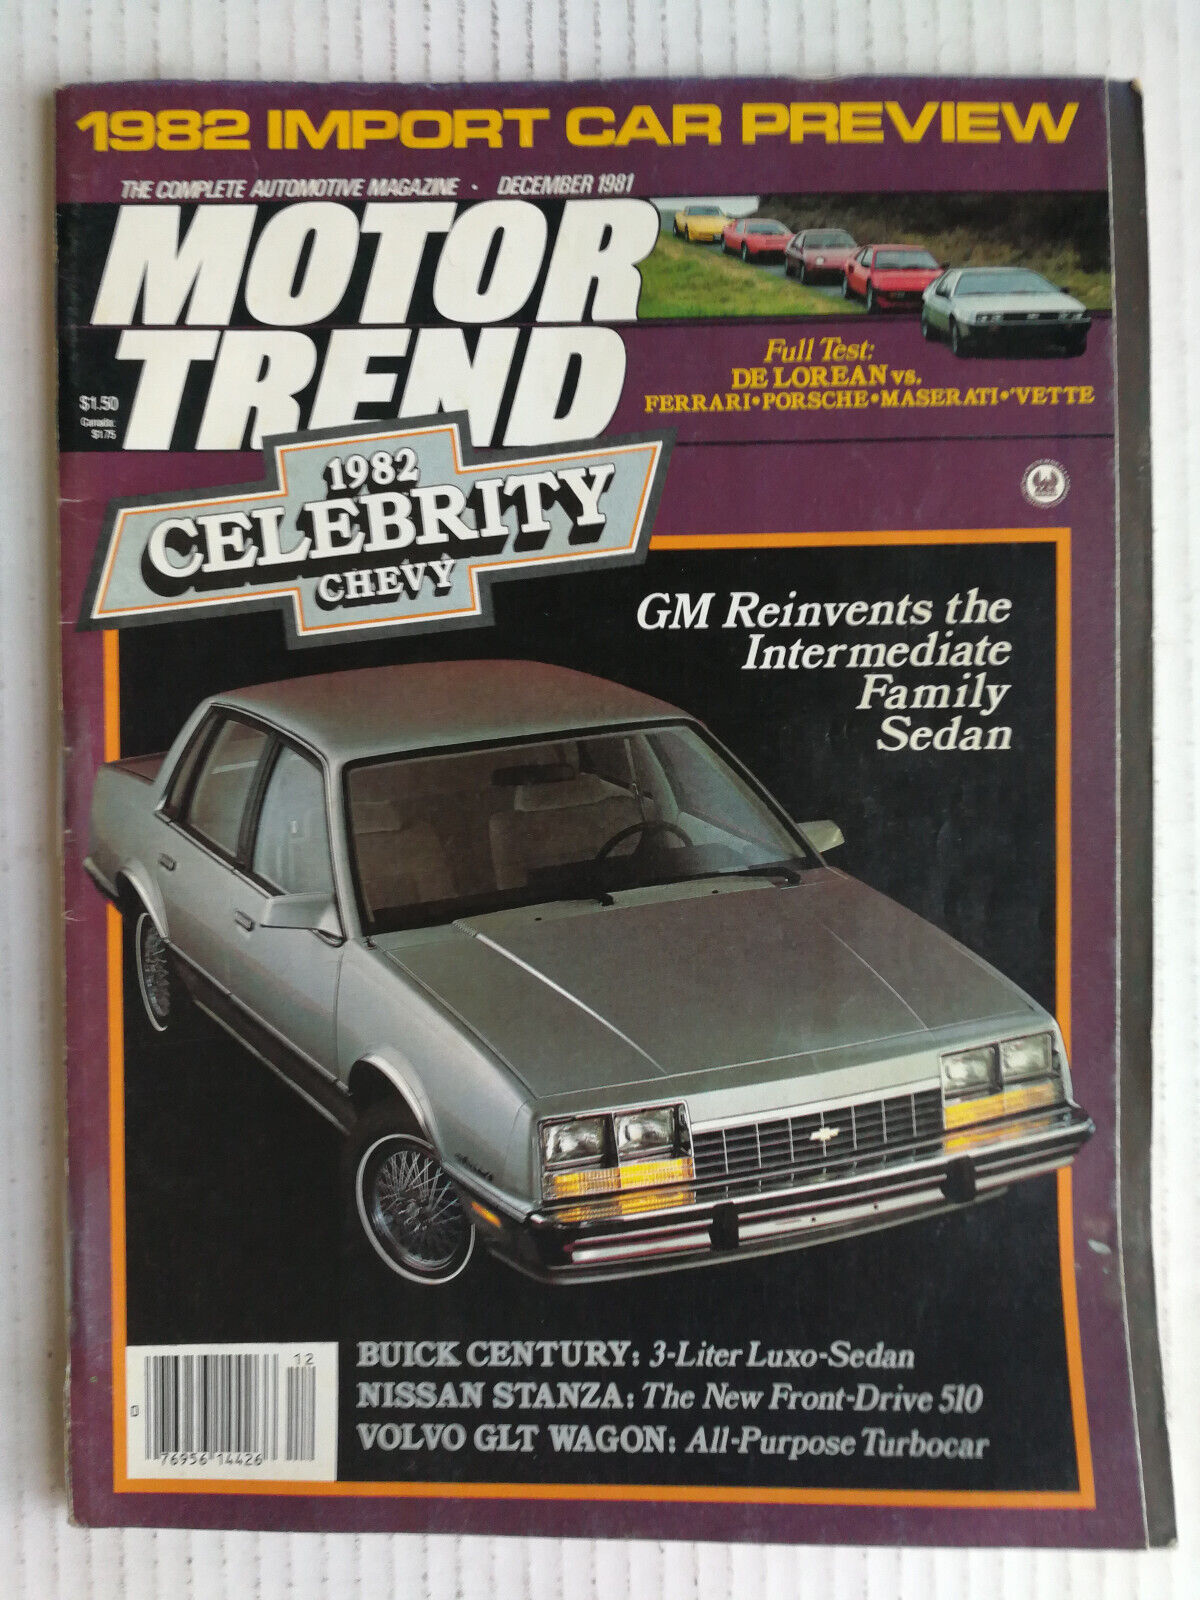 Motor Trend Magazine 1981 - The Complete Year - All 12 Issues